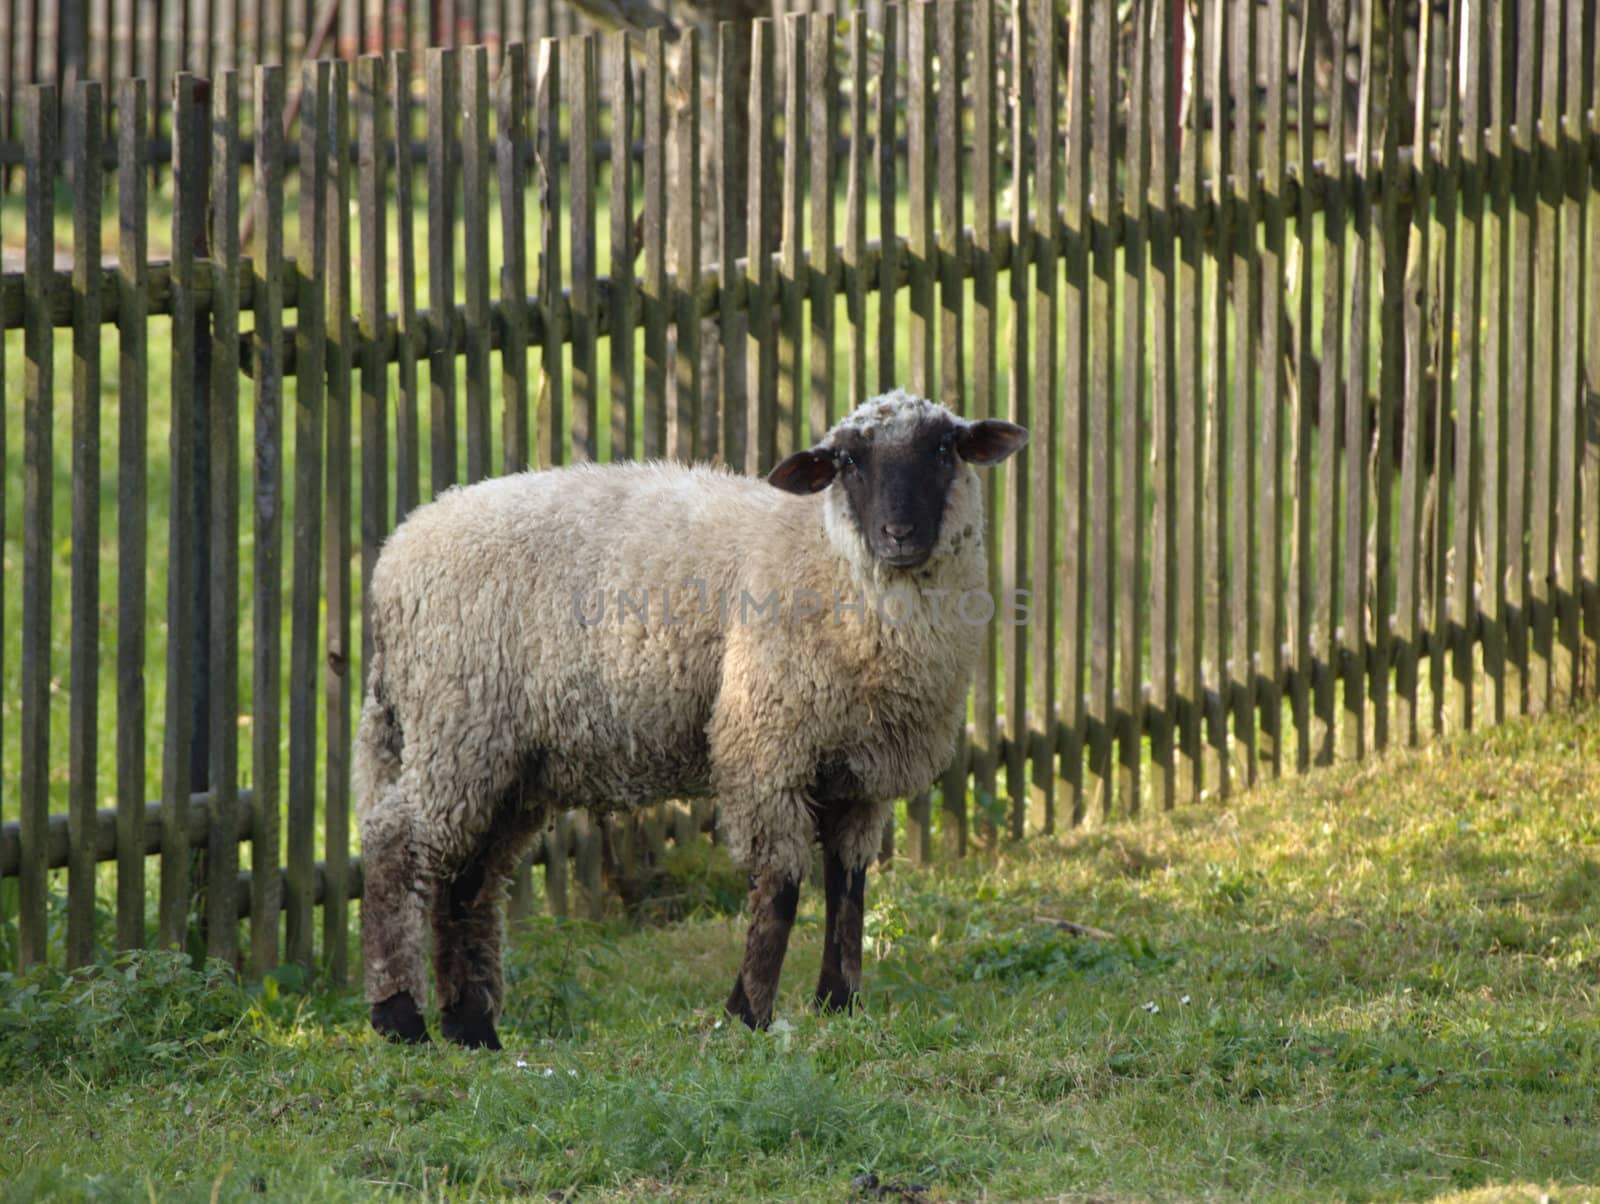 small sheep in the garden by renales